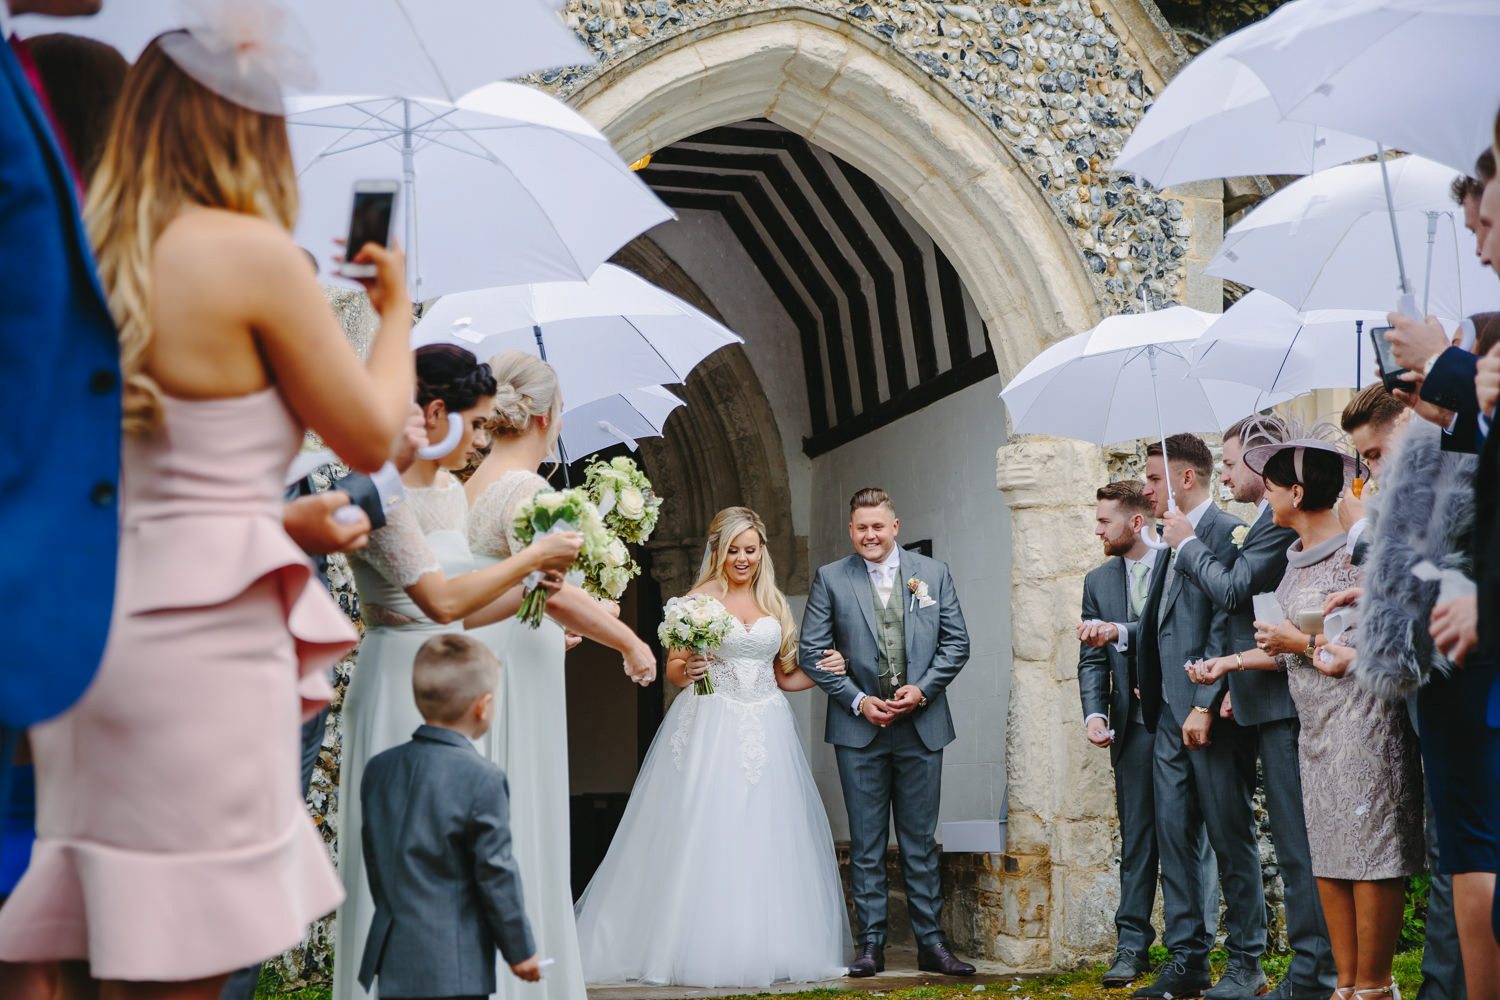 Bride and groom in church arch, weddings guests with umbrellas